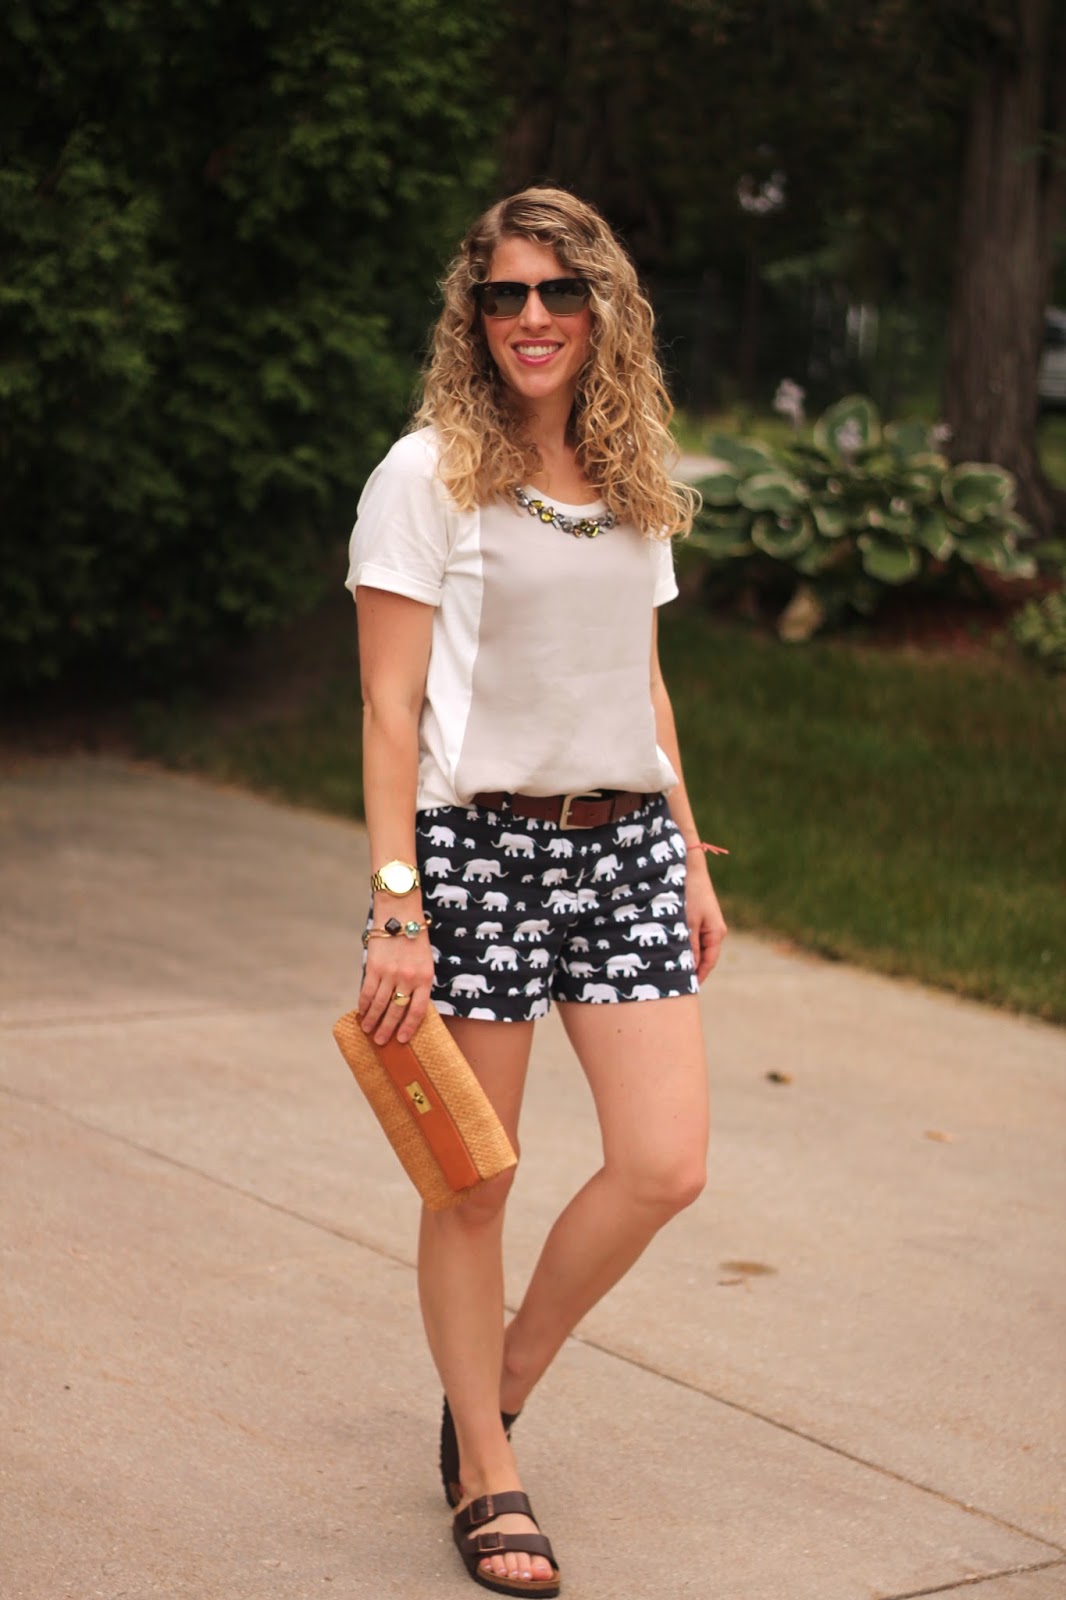 Elephant Print Shorts and Jeweled Top